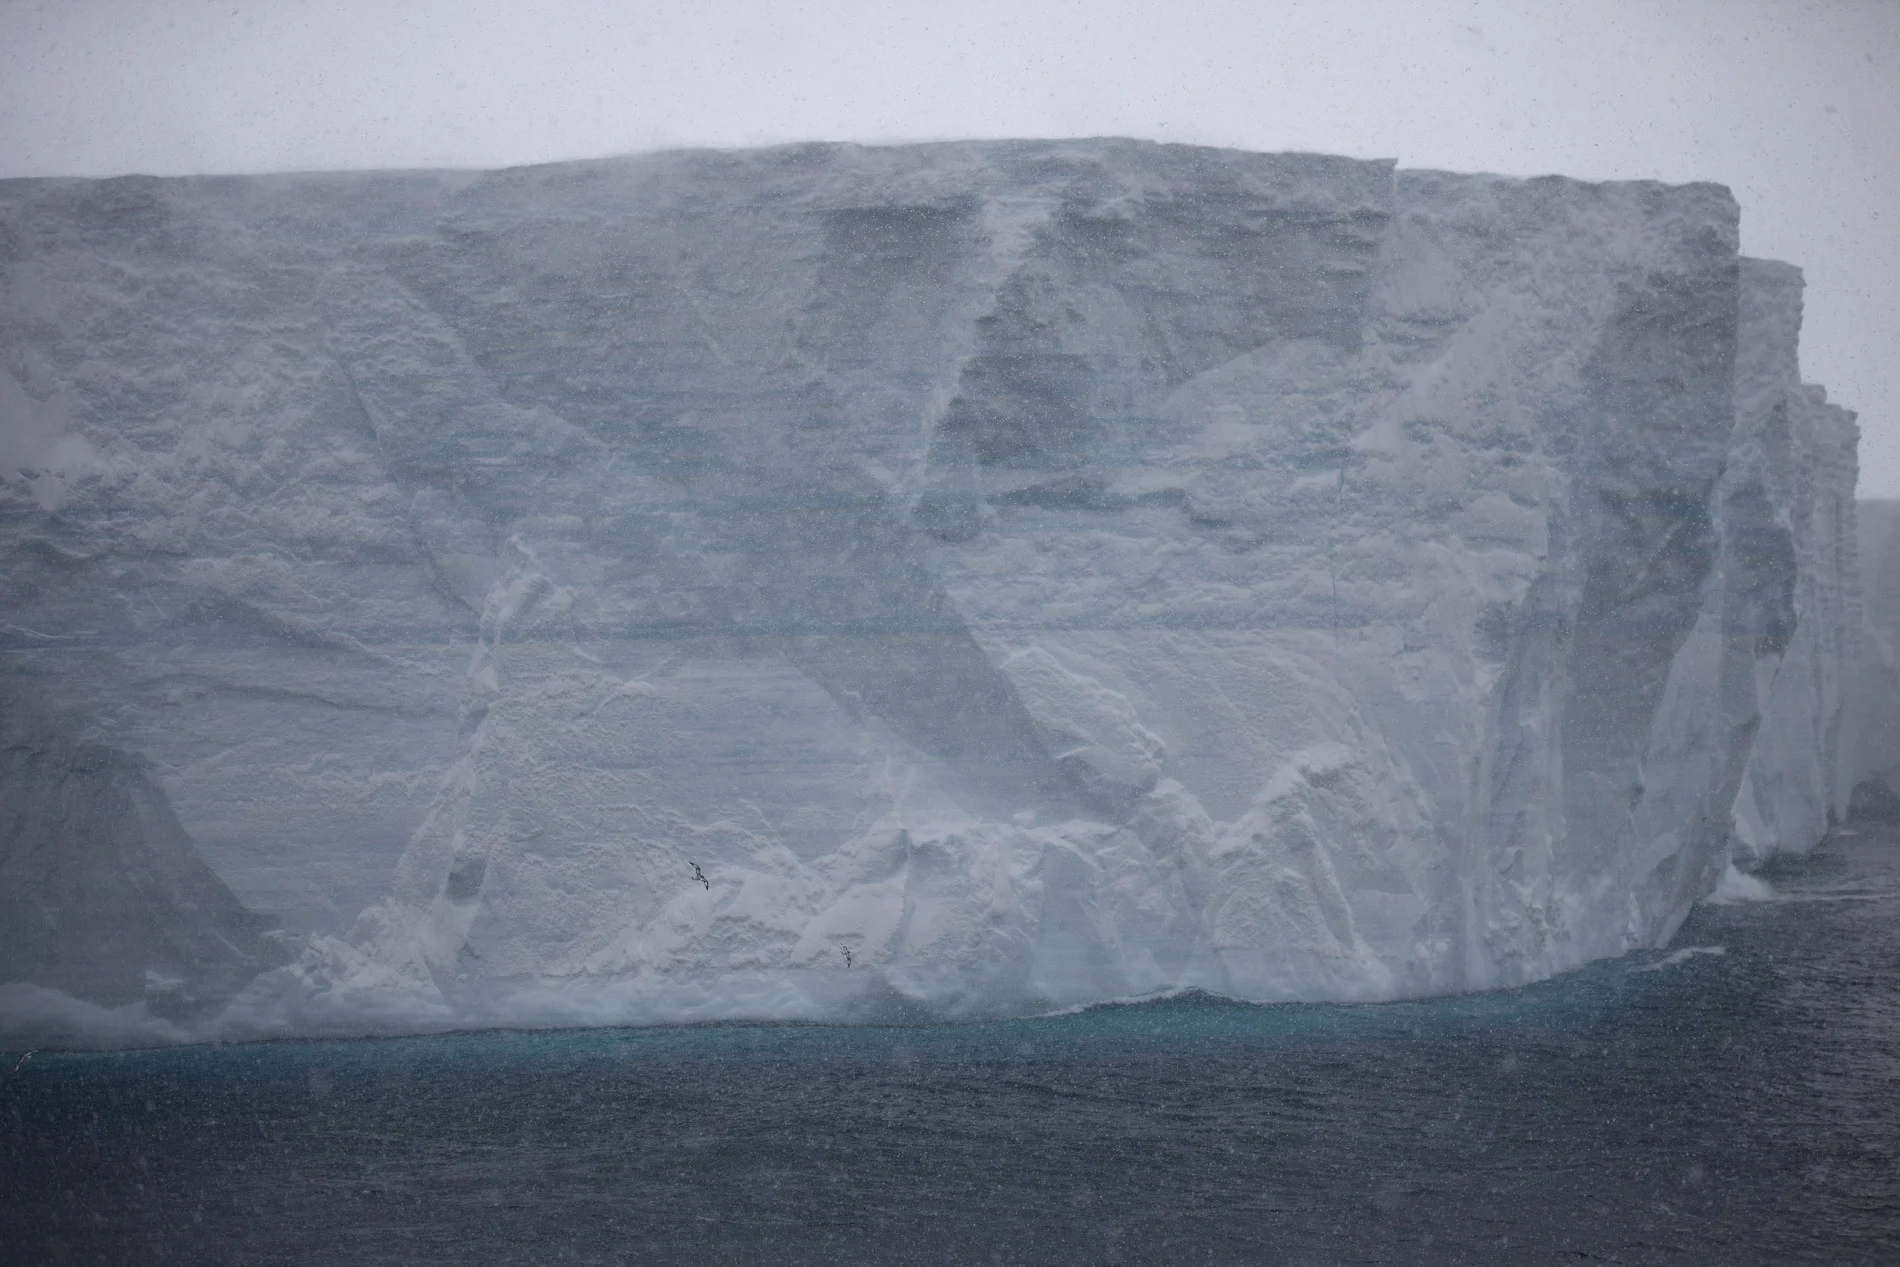 Giant A-68a iceberg released 152 billion tons of freshwater into the ocean